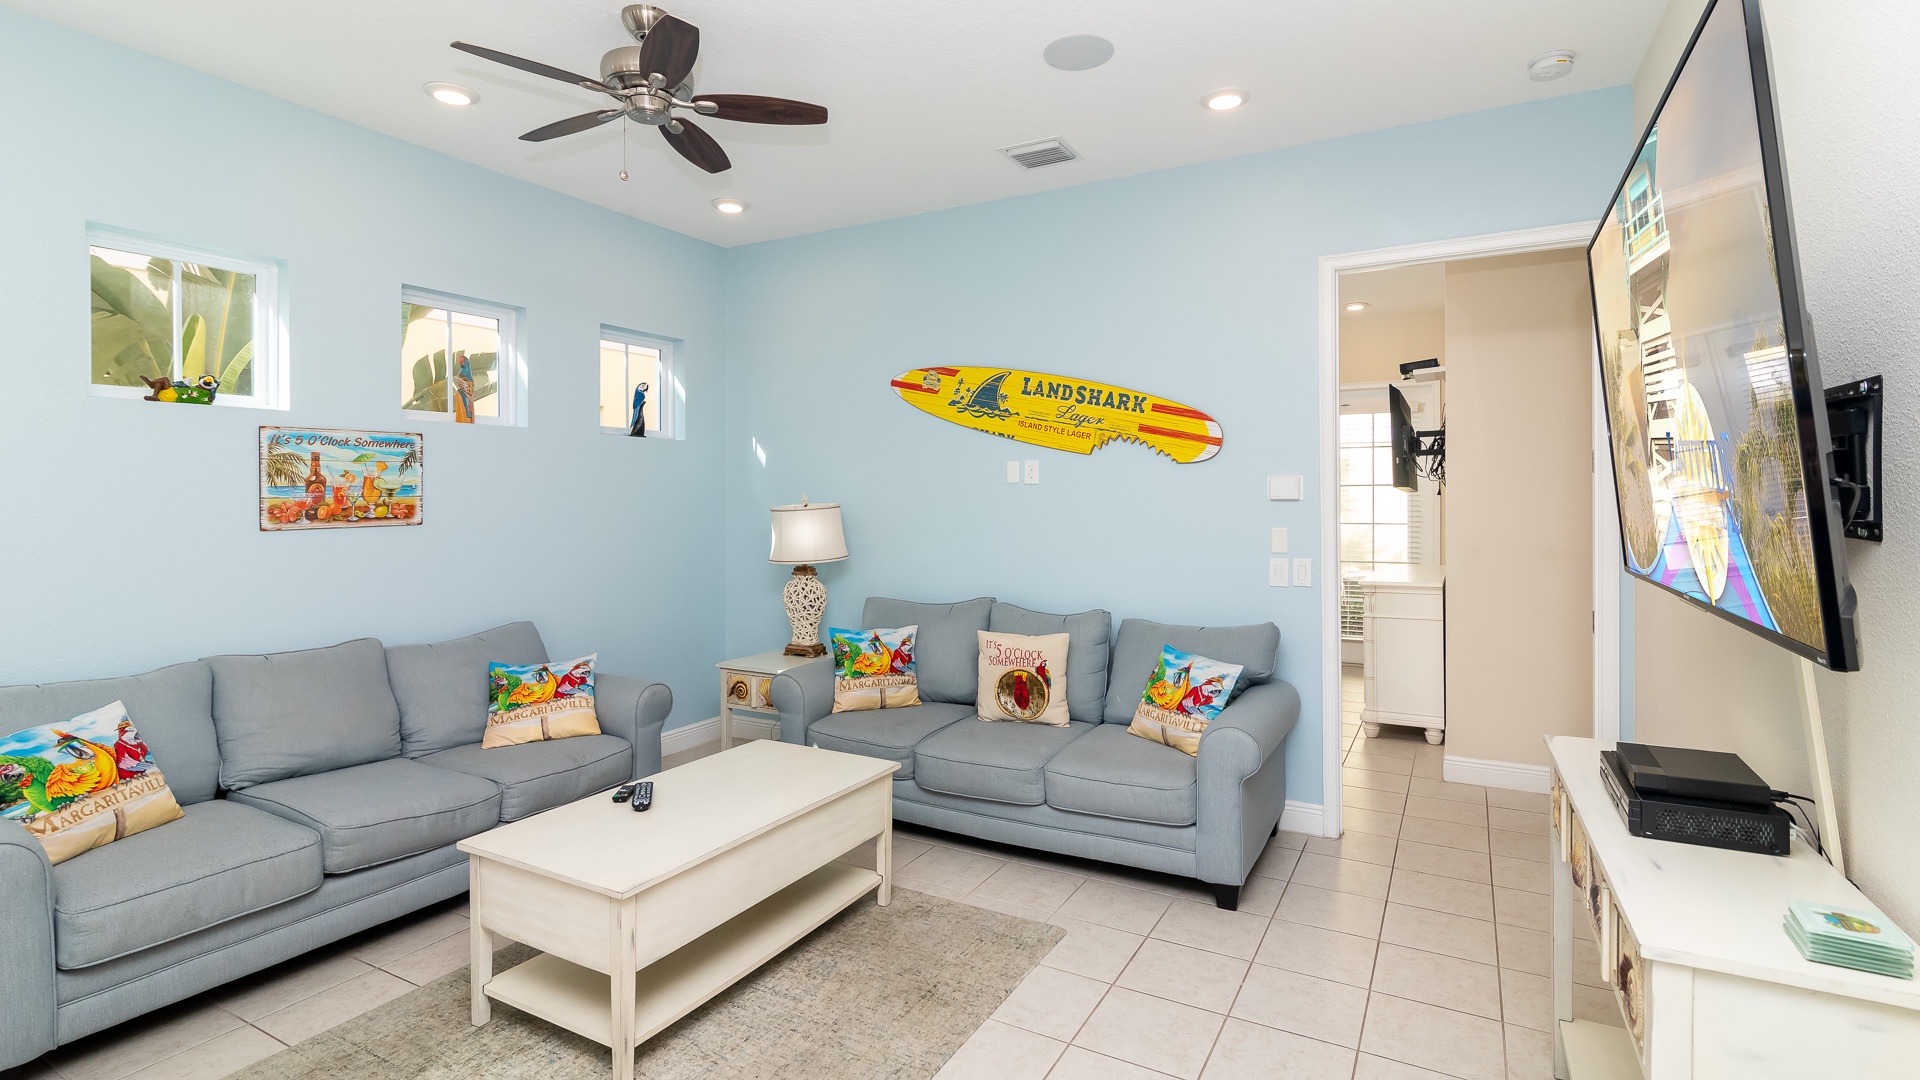 Enjoy a family movie night in the living room with ample seating and a smart TV